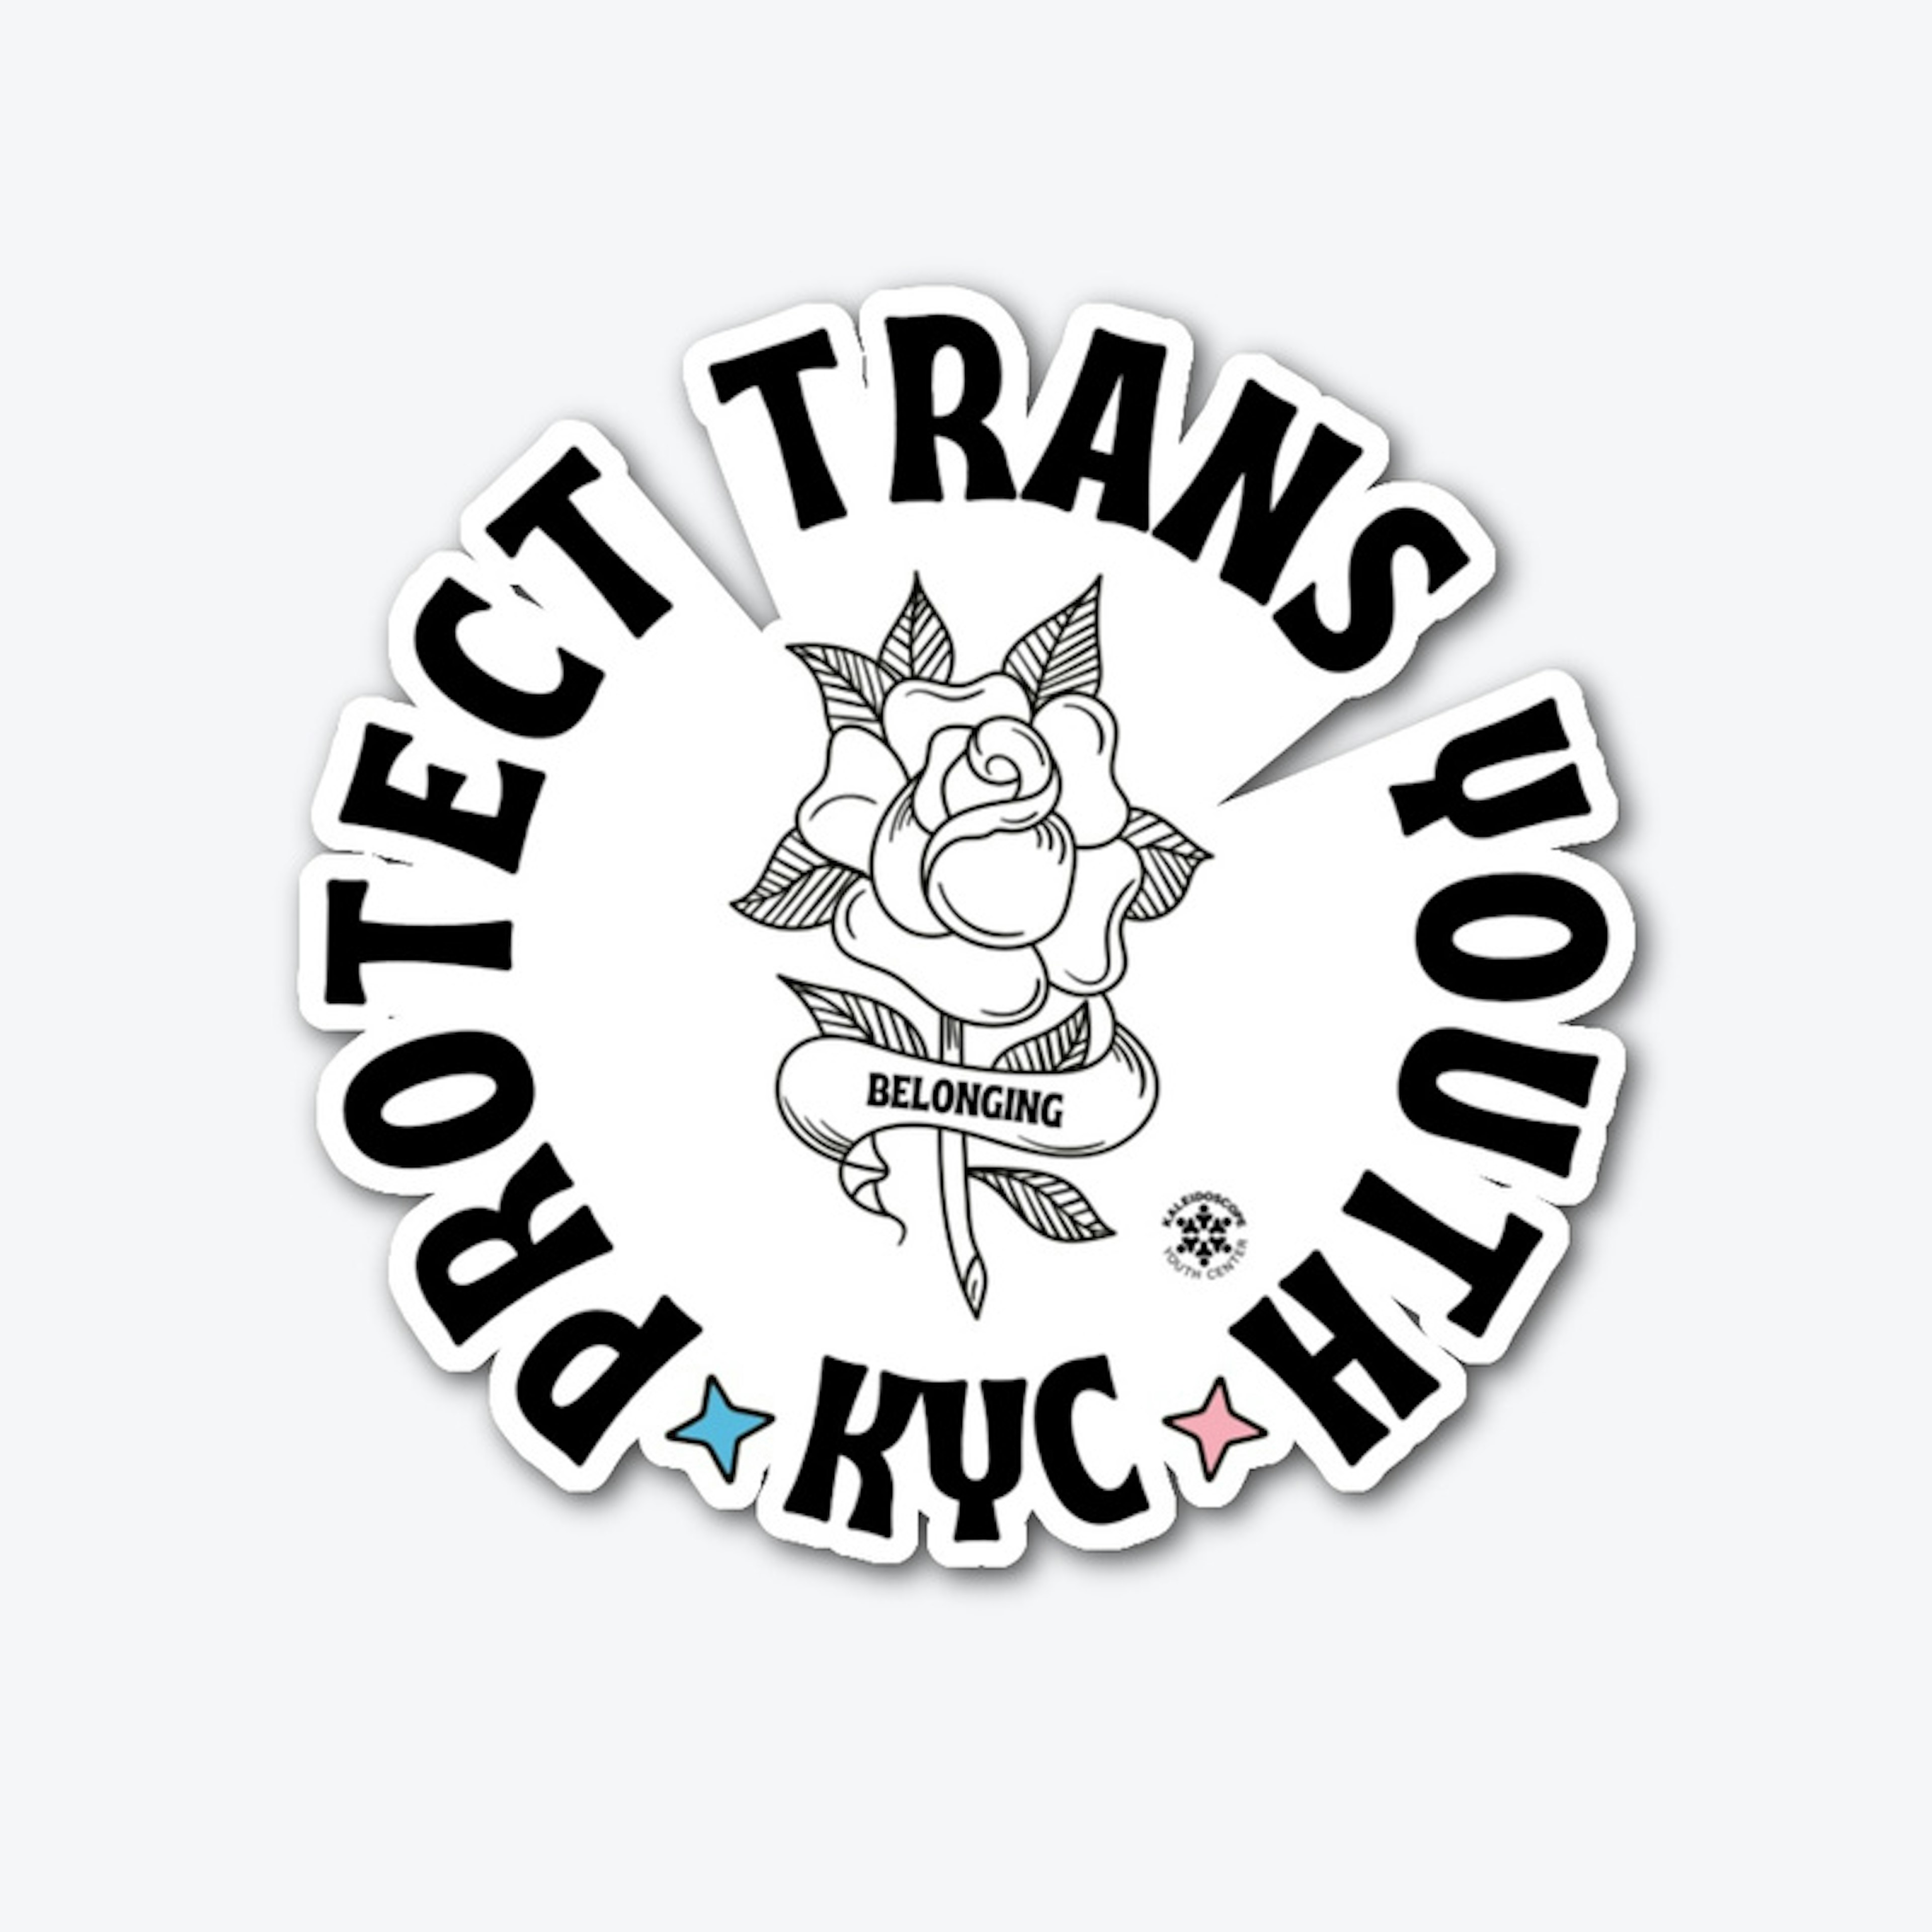 Protect Trans Youth - Rose